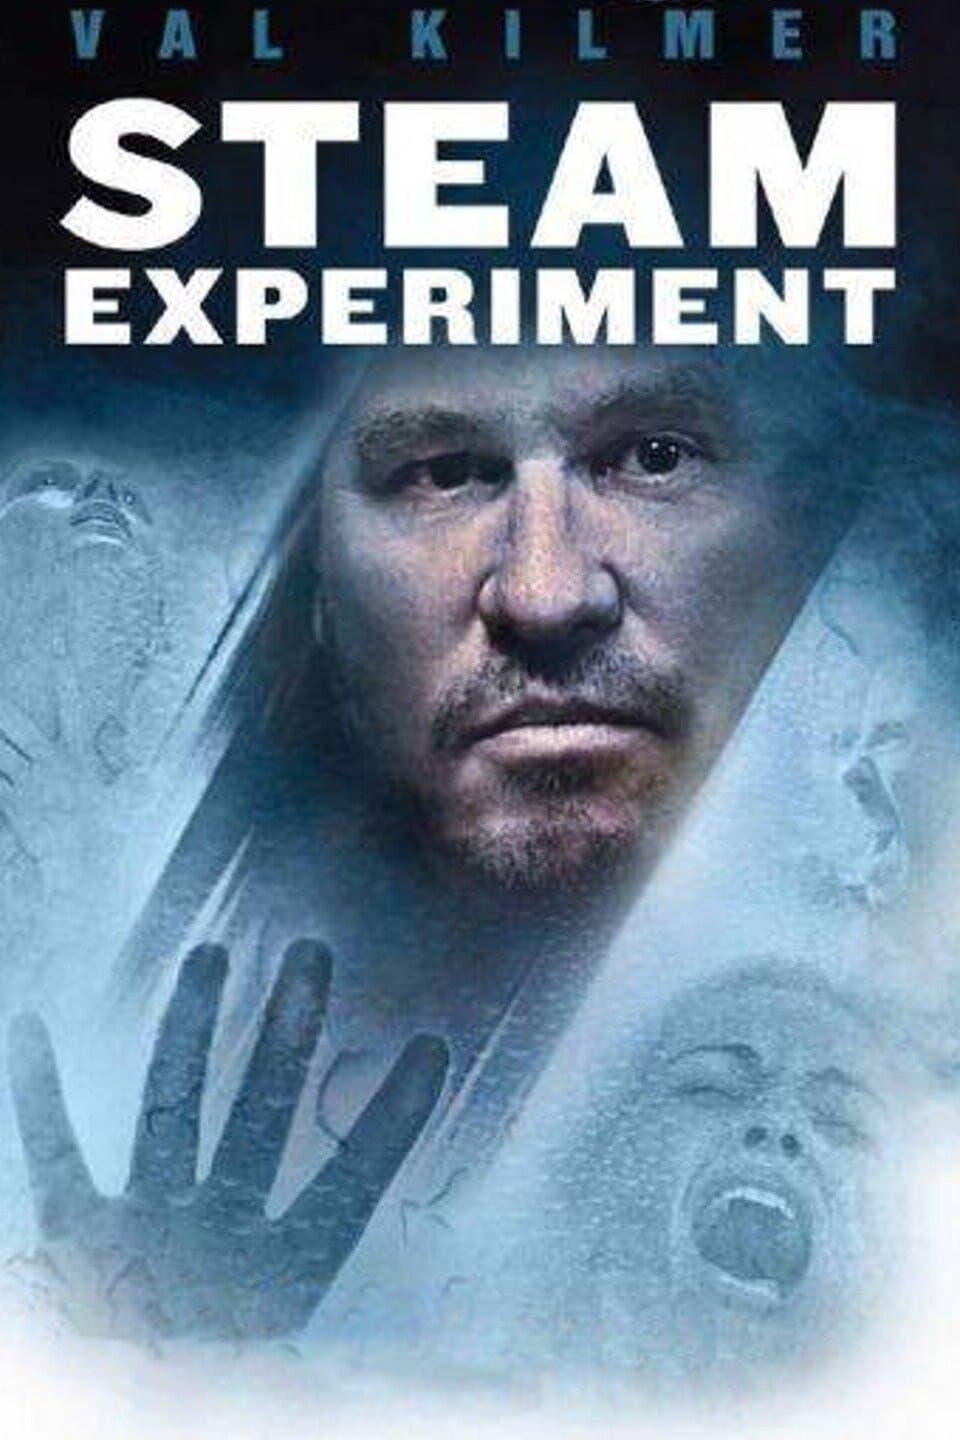 The Steam Experiment poster